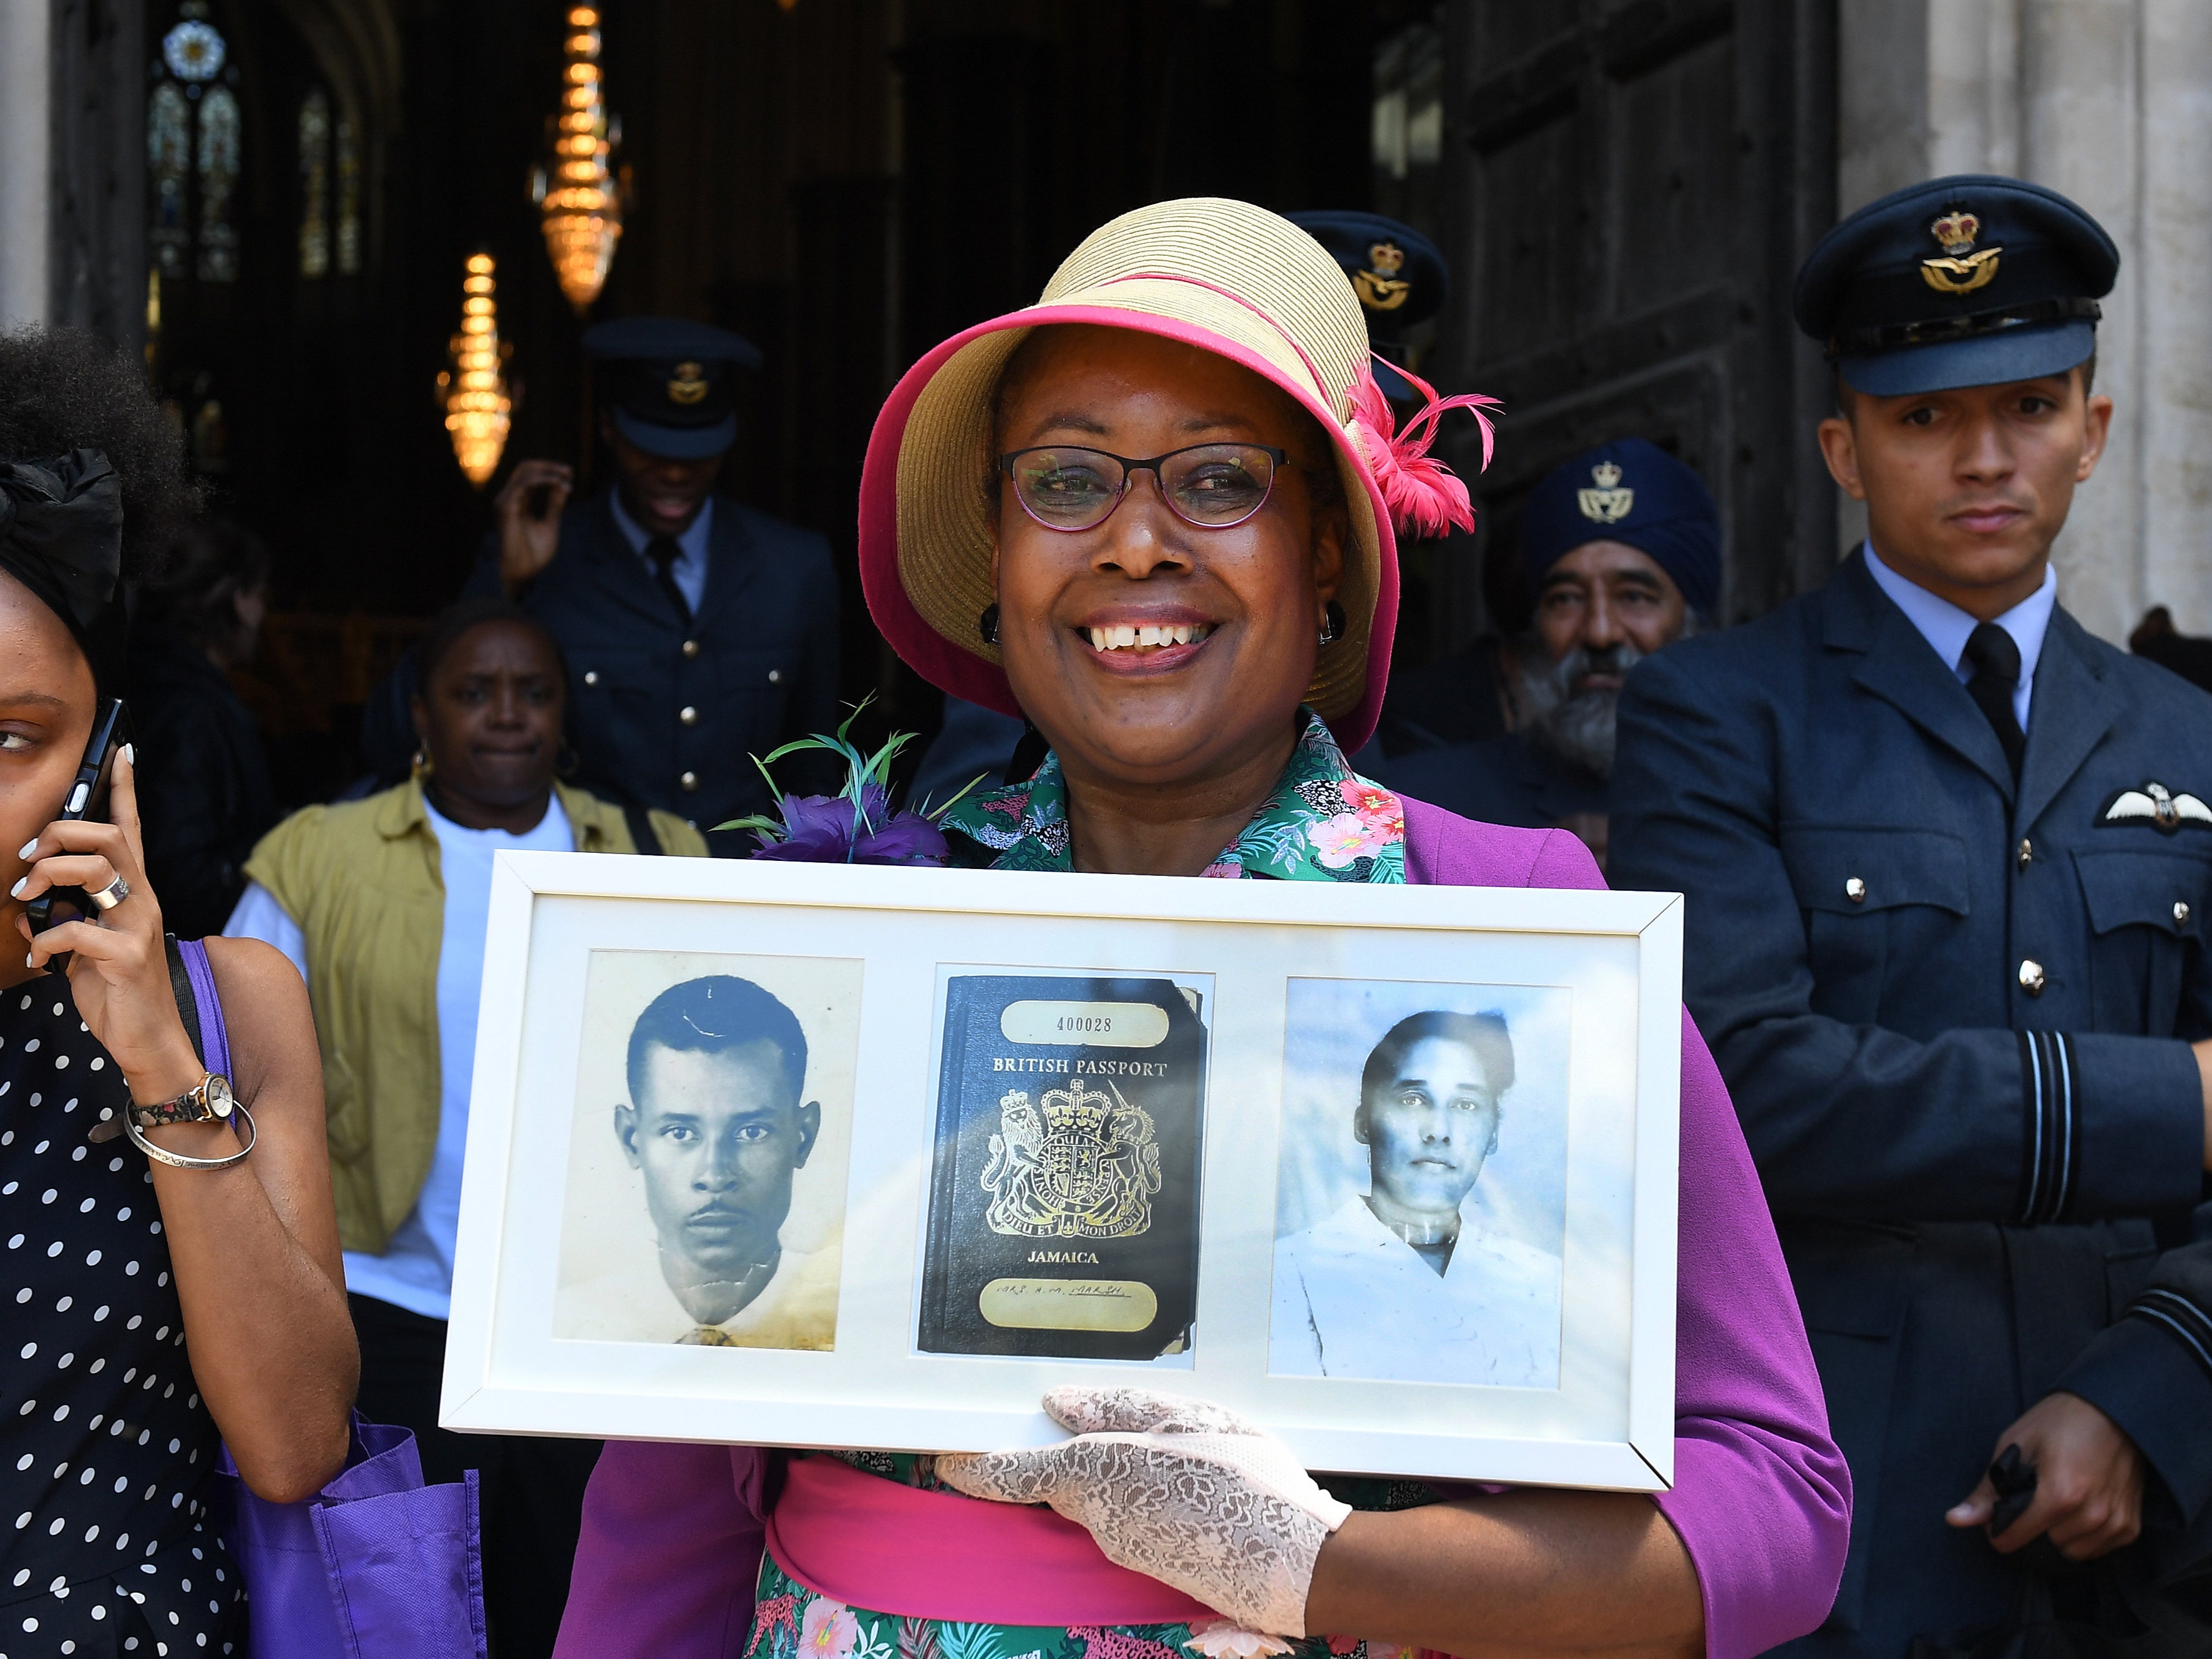 Andria Marsh holds up photographs of her parents and her original British passport after a service at Westminster Abbey in celebration of 70 years since the arrival of Empire Windrush, 22 June 2018